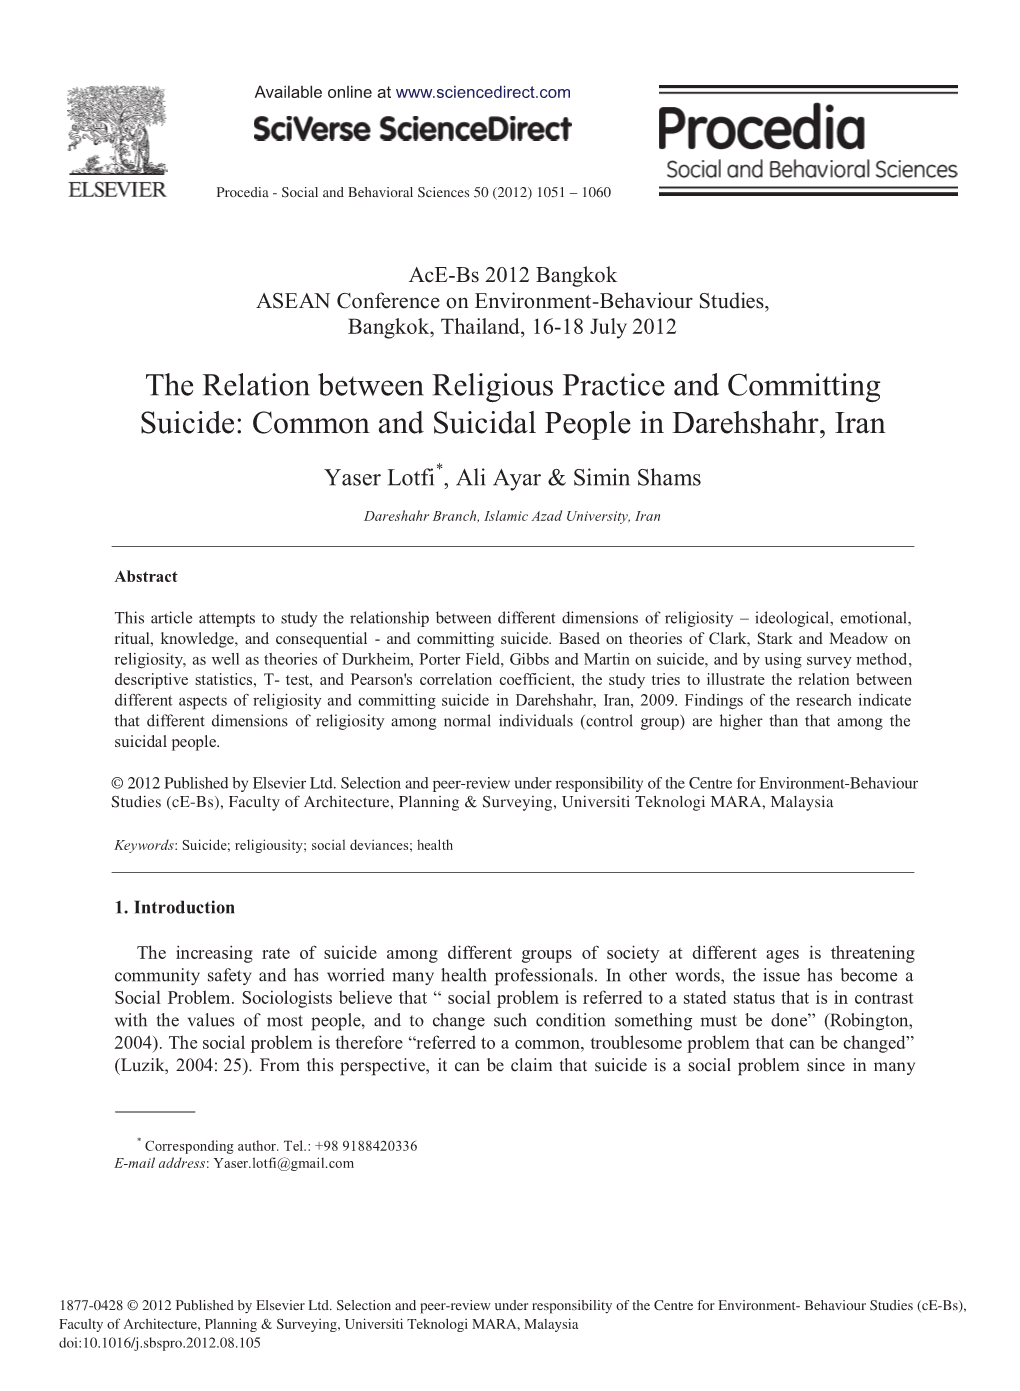 The Relation Between Religious Practice and Committing Suicide: Common and Suicidal People in Darehshahr, Iran